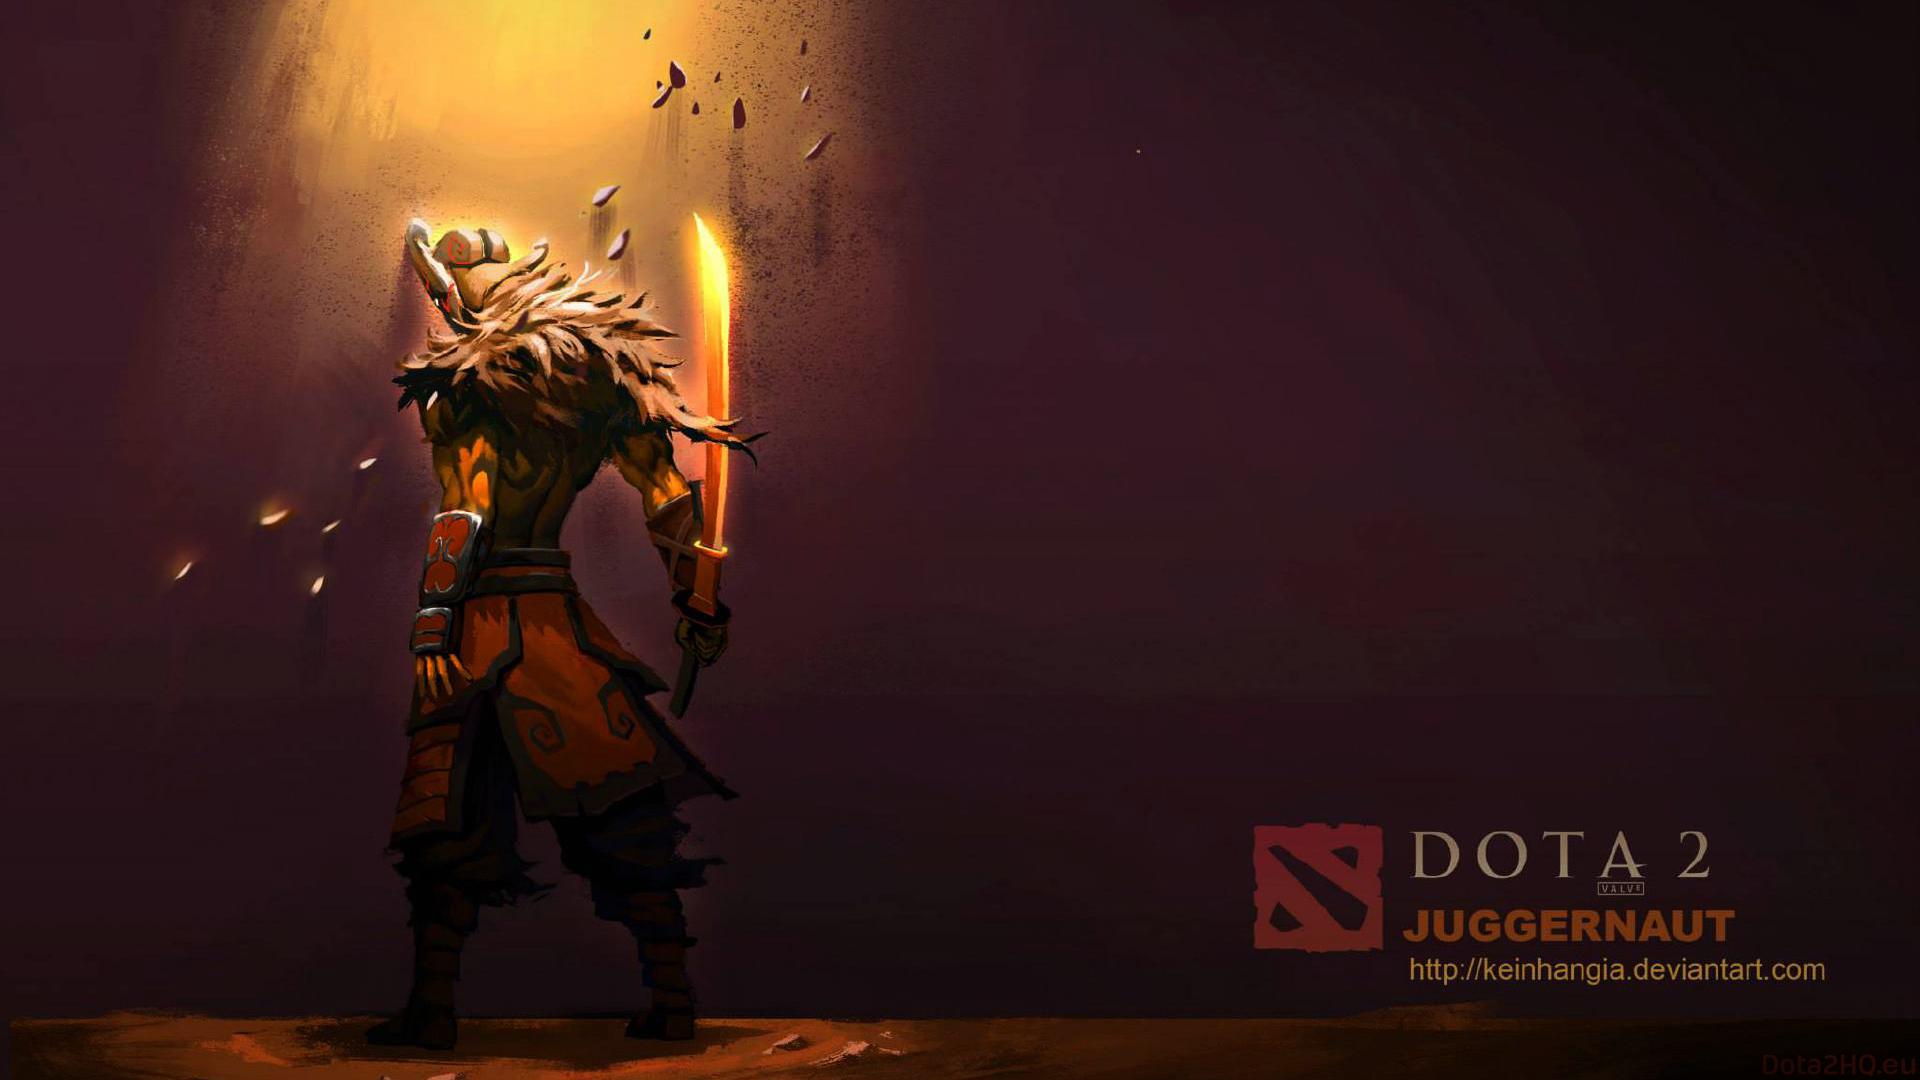 Adorable HDQ Background of Dota 47 Dota 2 High Definition